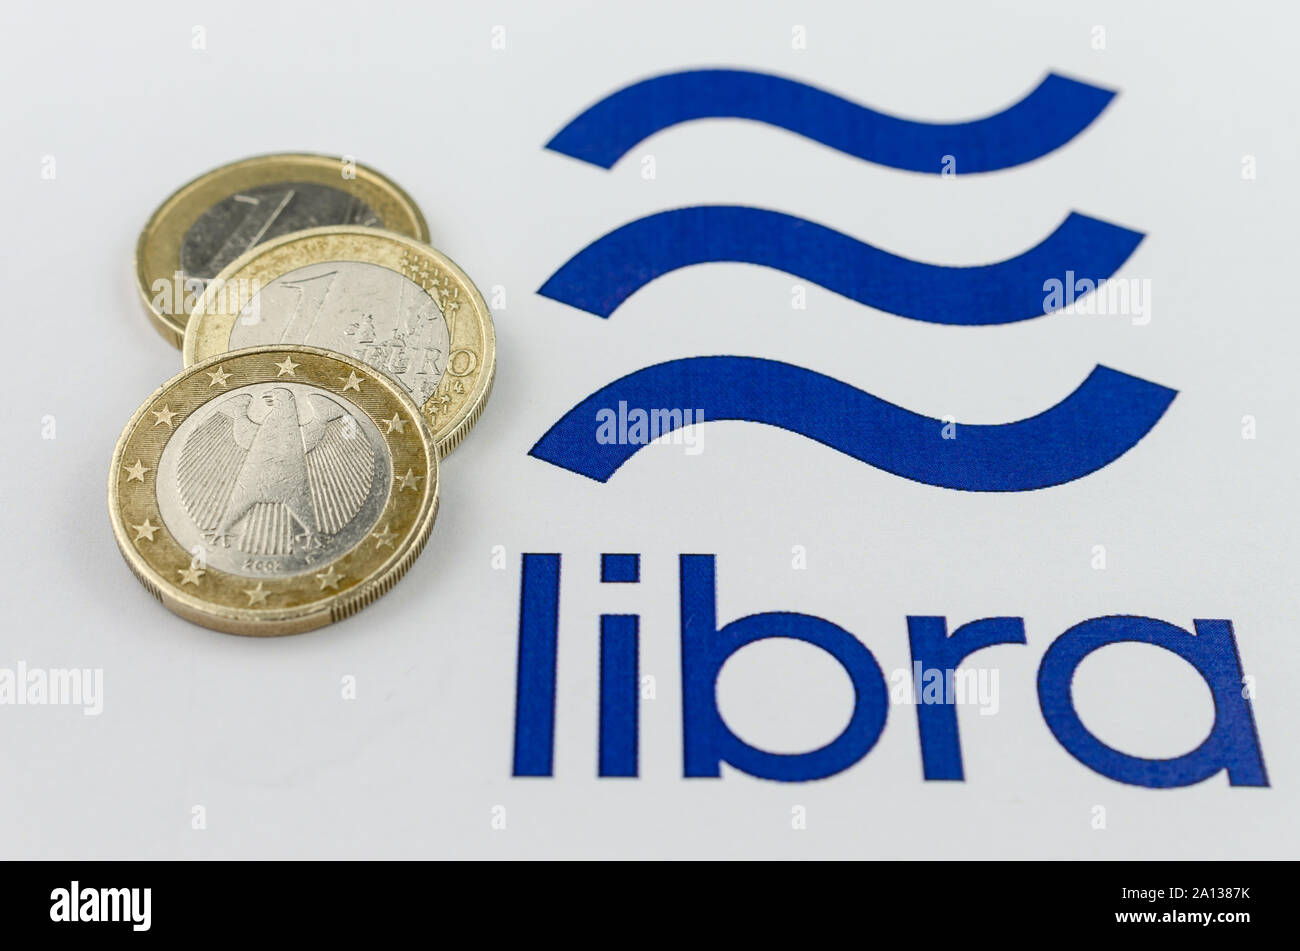 Facebook Libra cryptocurrency logos printed and the Euro coins next to them. Close up photo with shallow depth of field. Stock Photo